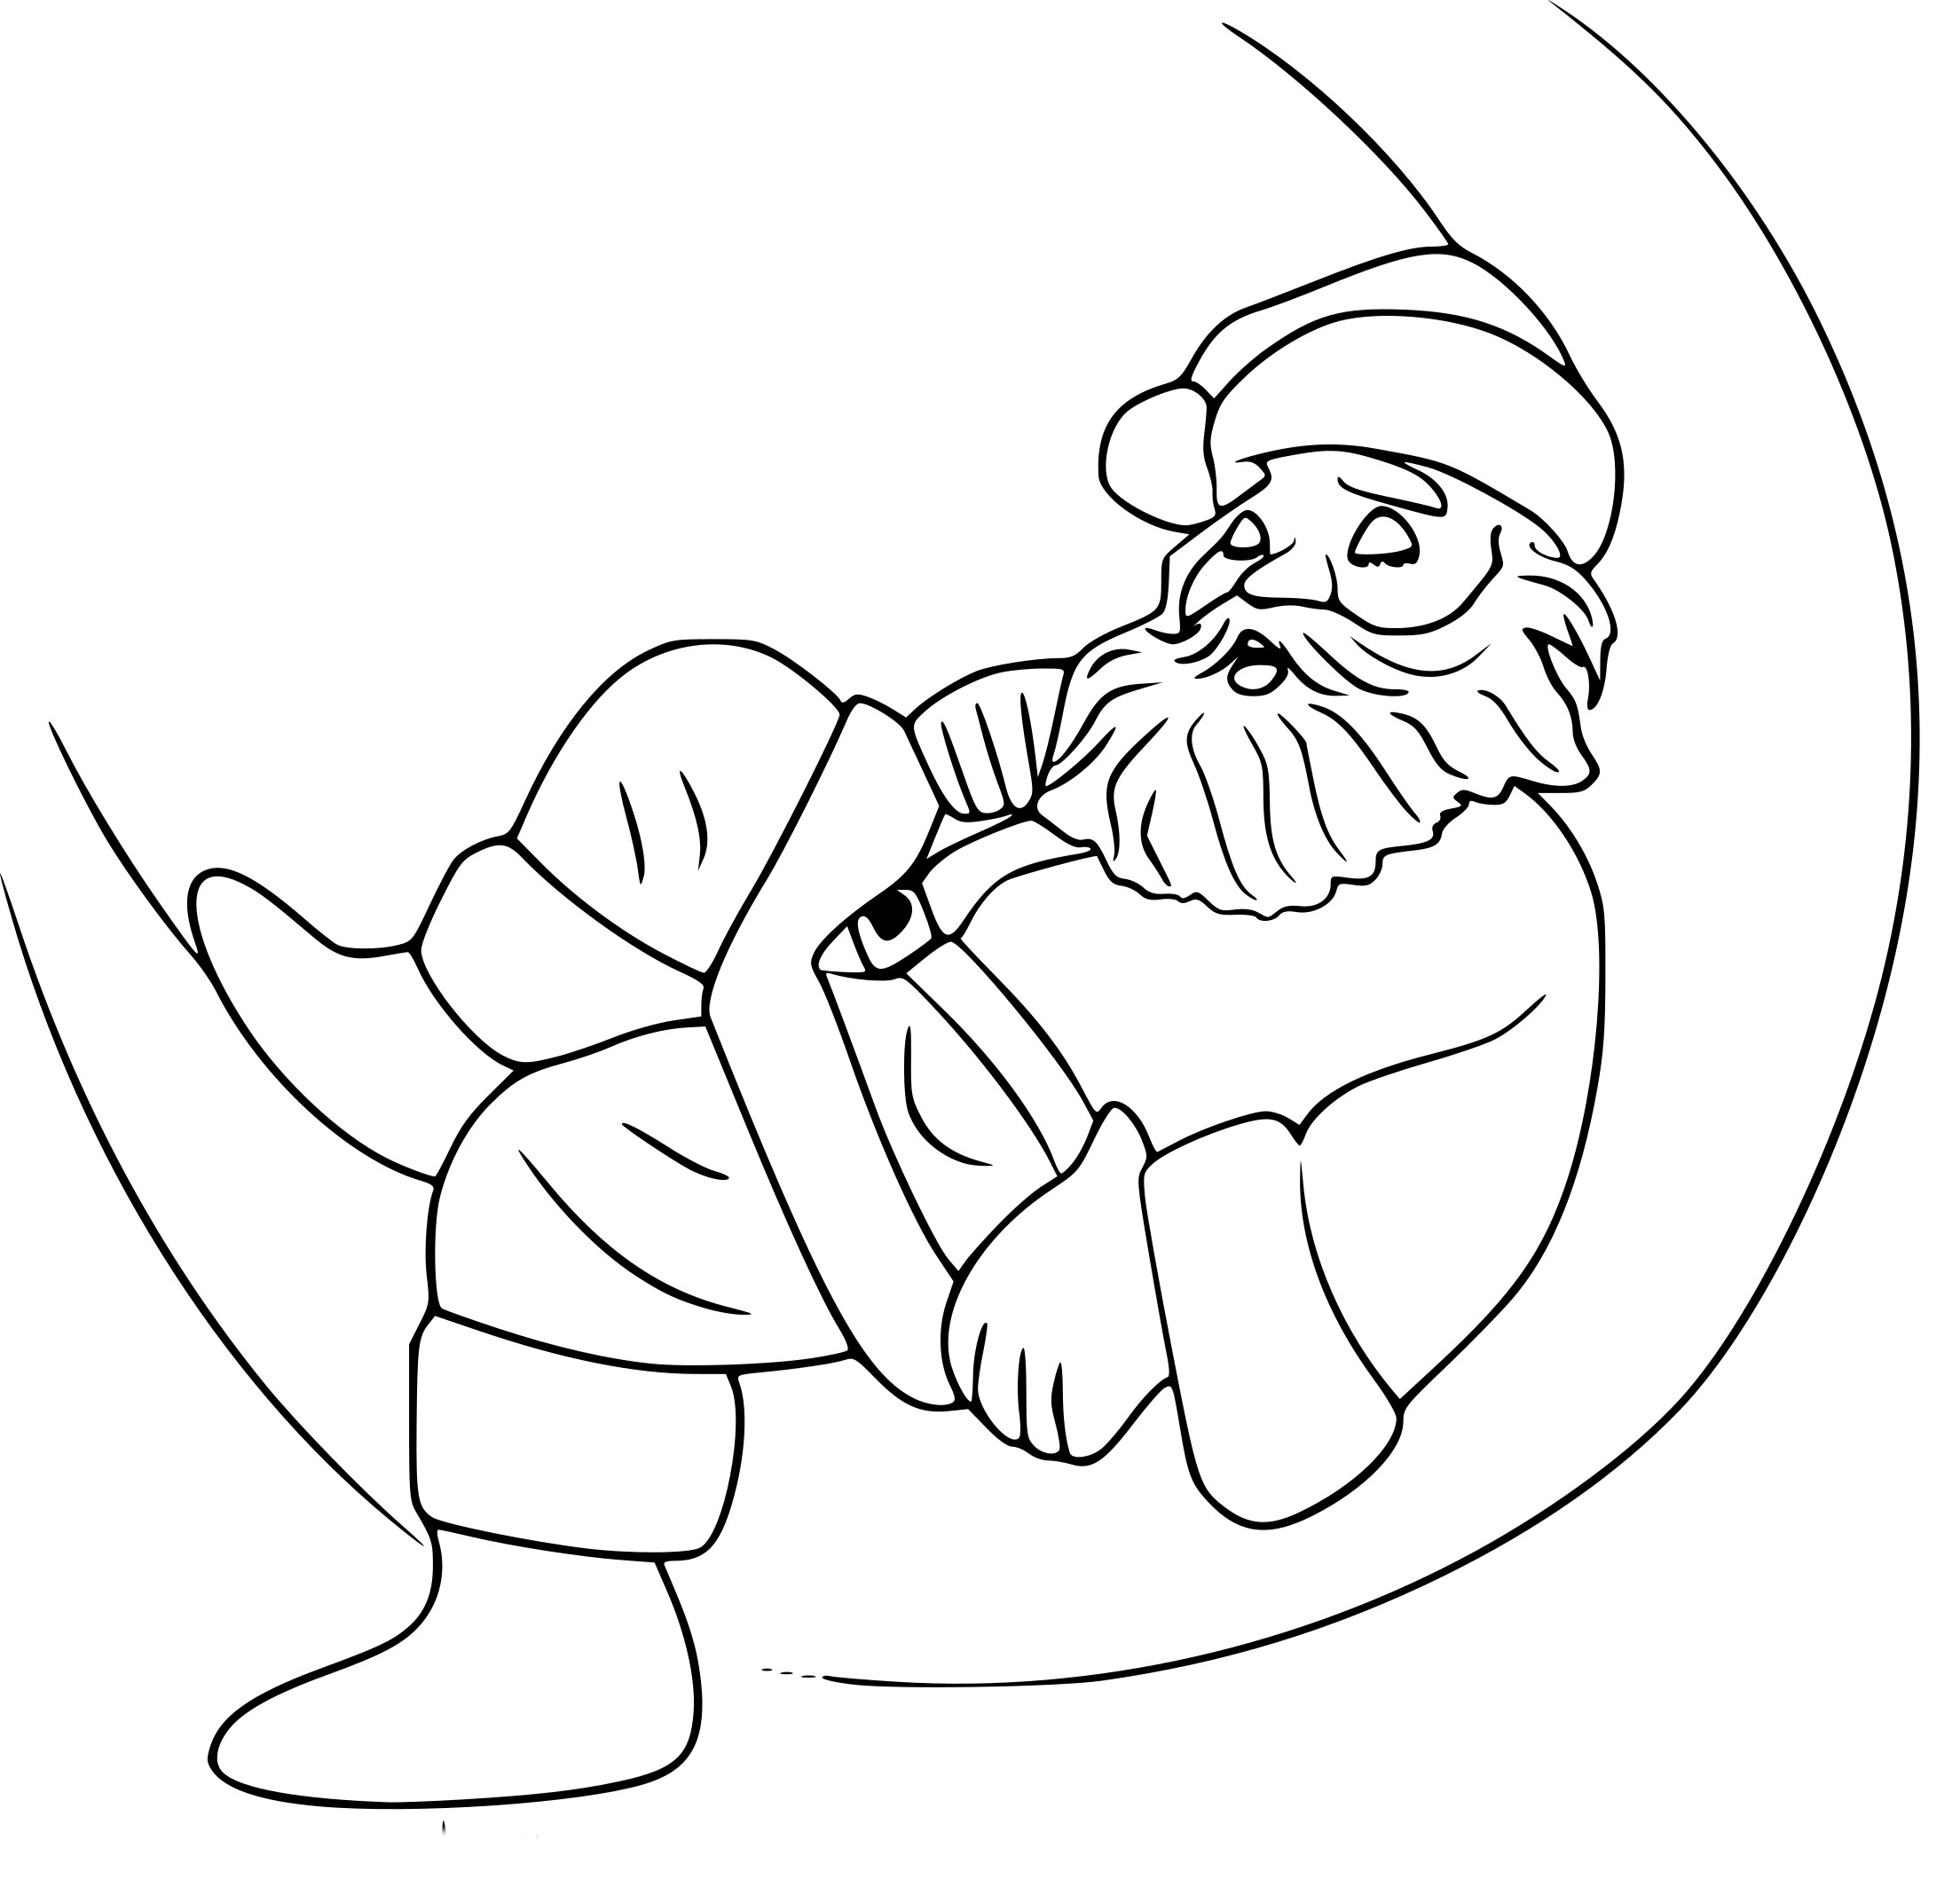 Santa Claus On The Moon coloring page